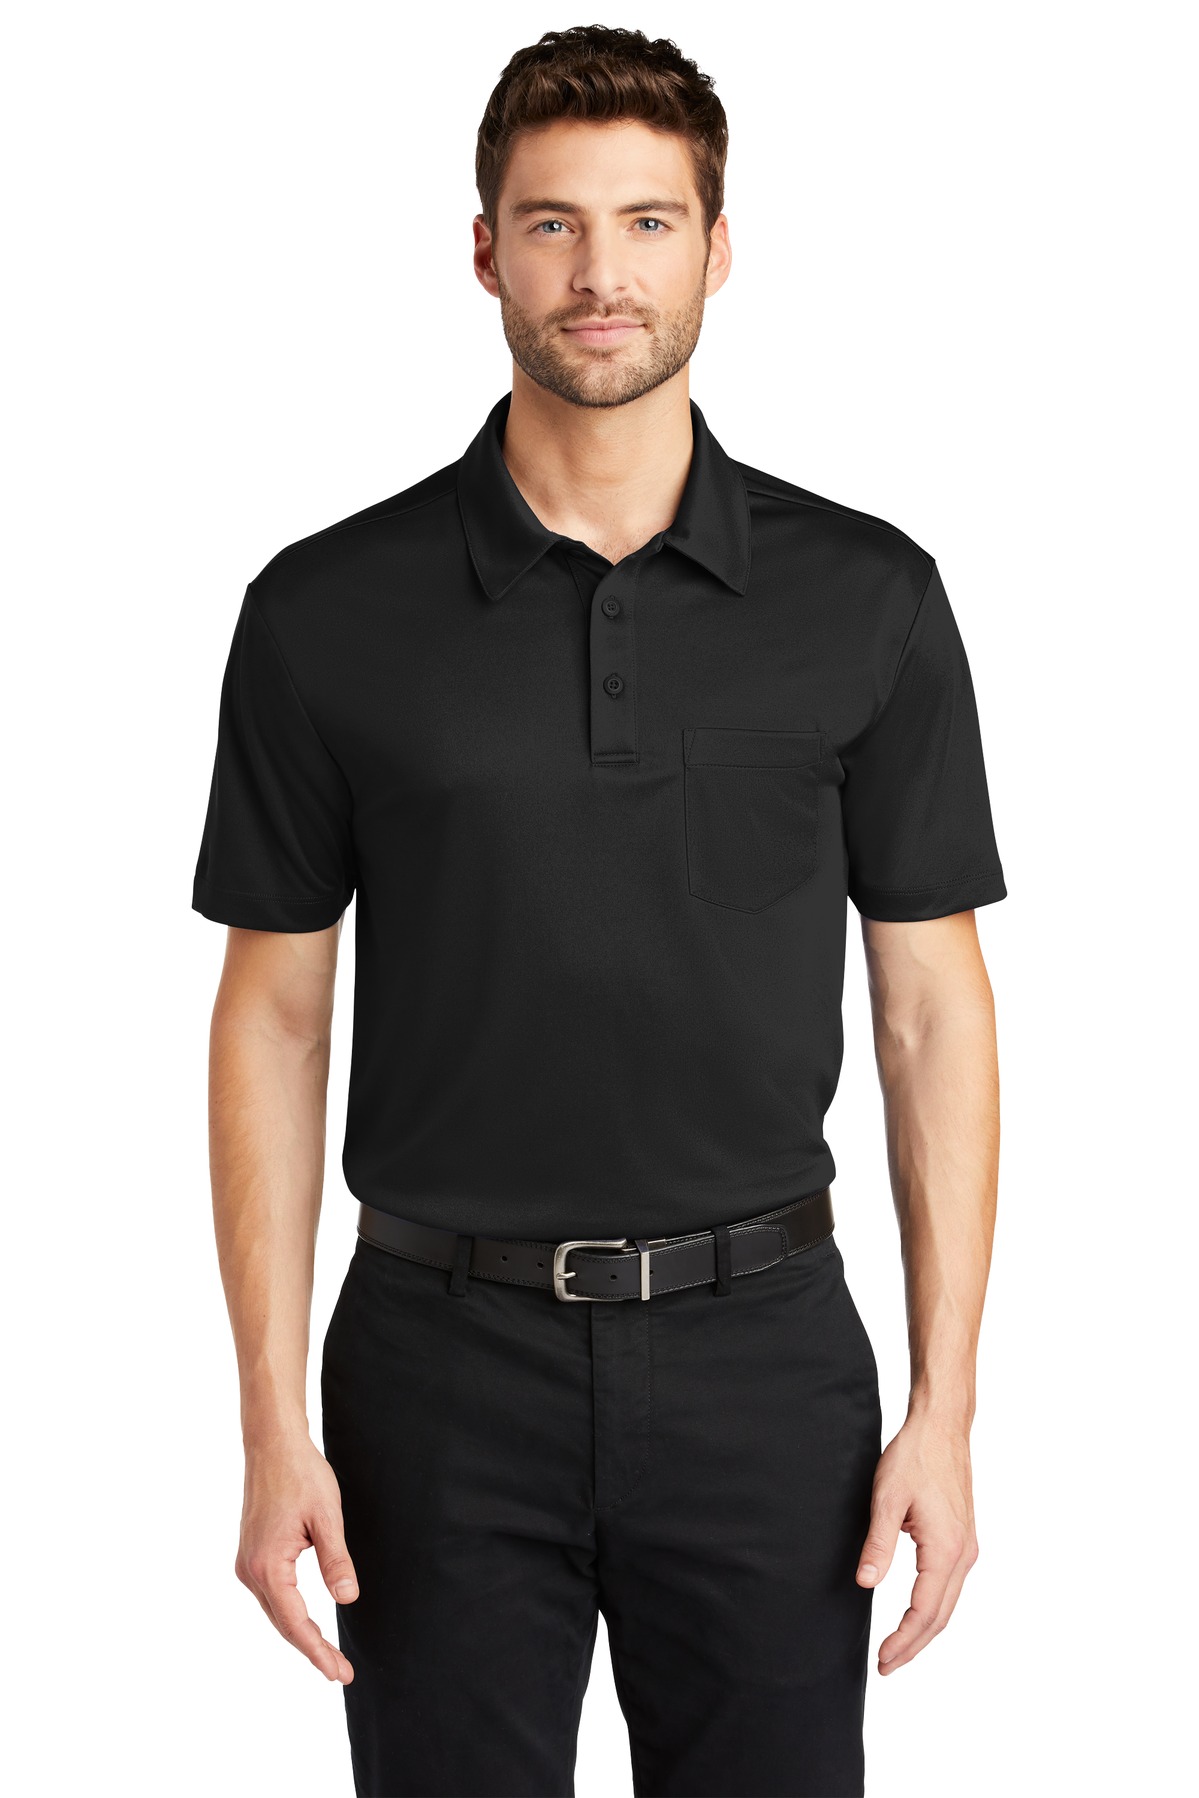 Port Authority Silk Touch Performance Pocket Polo-Port Authority